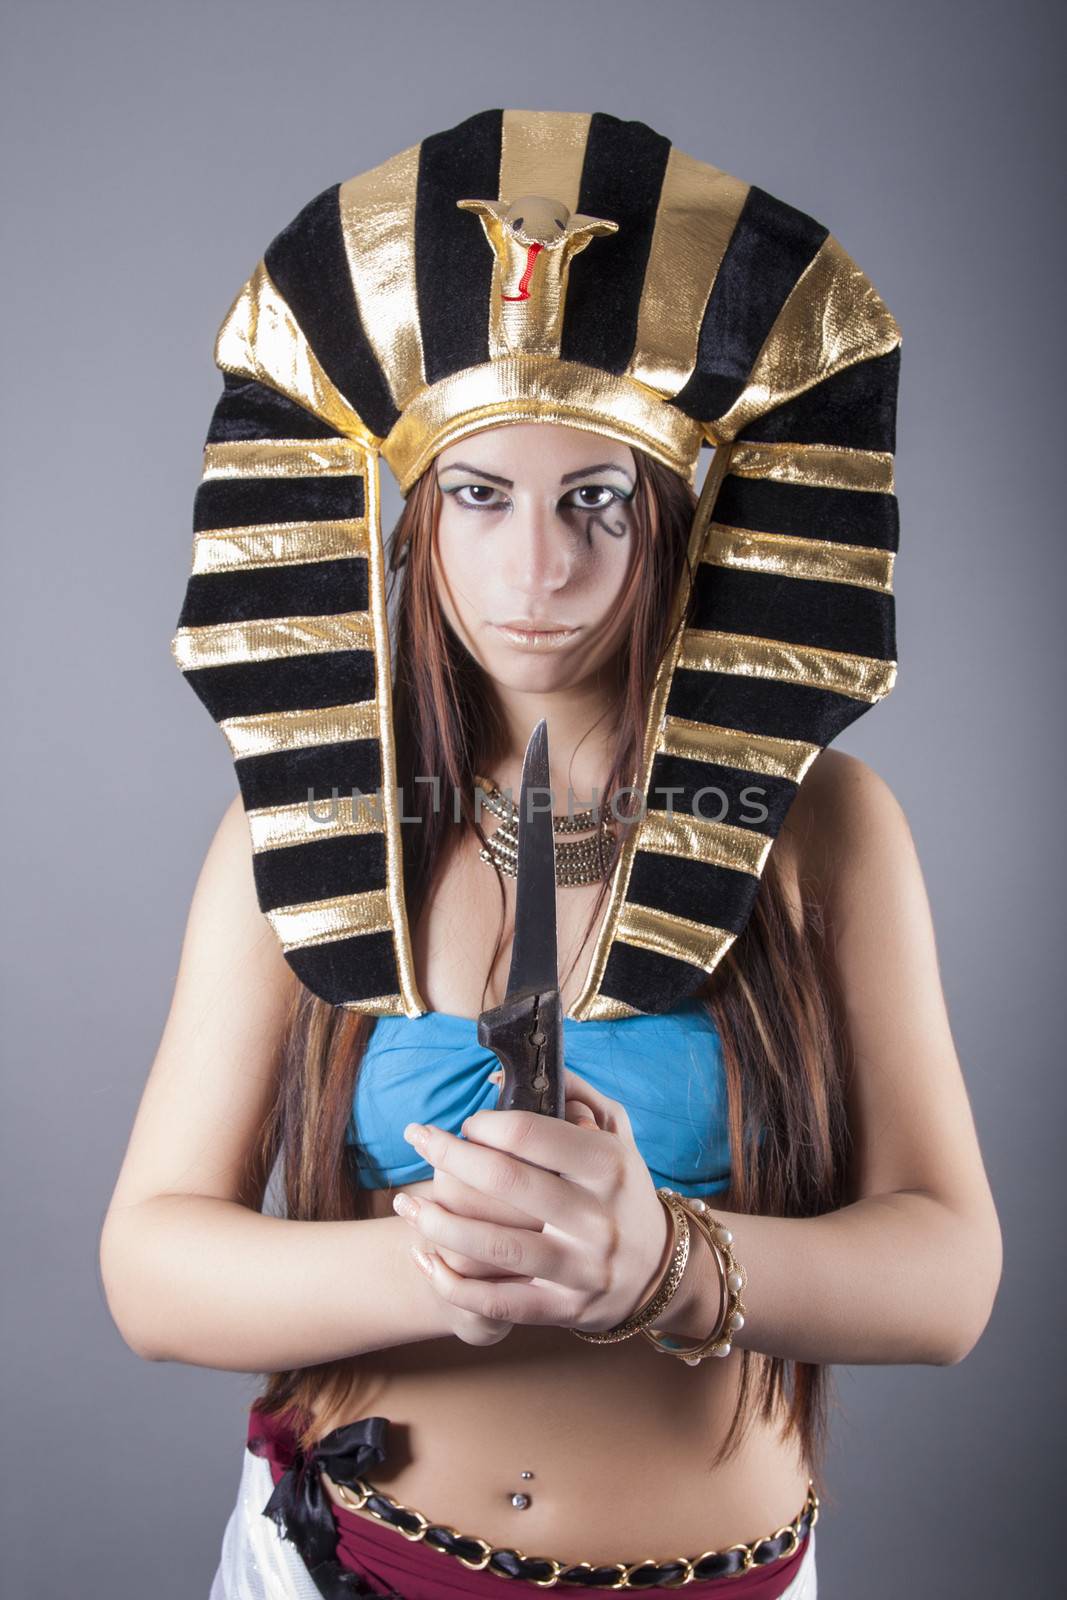 Cleopatra queen of egypt by dukibu